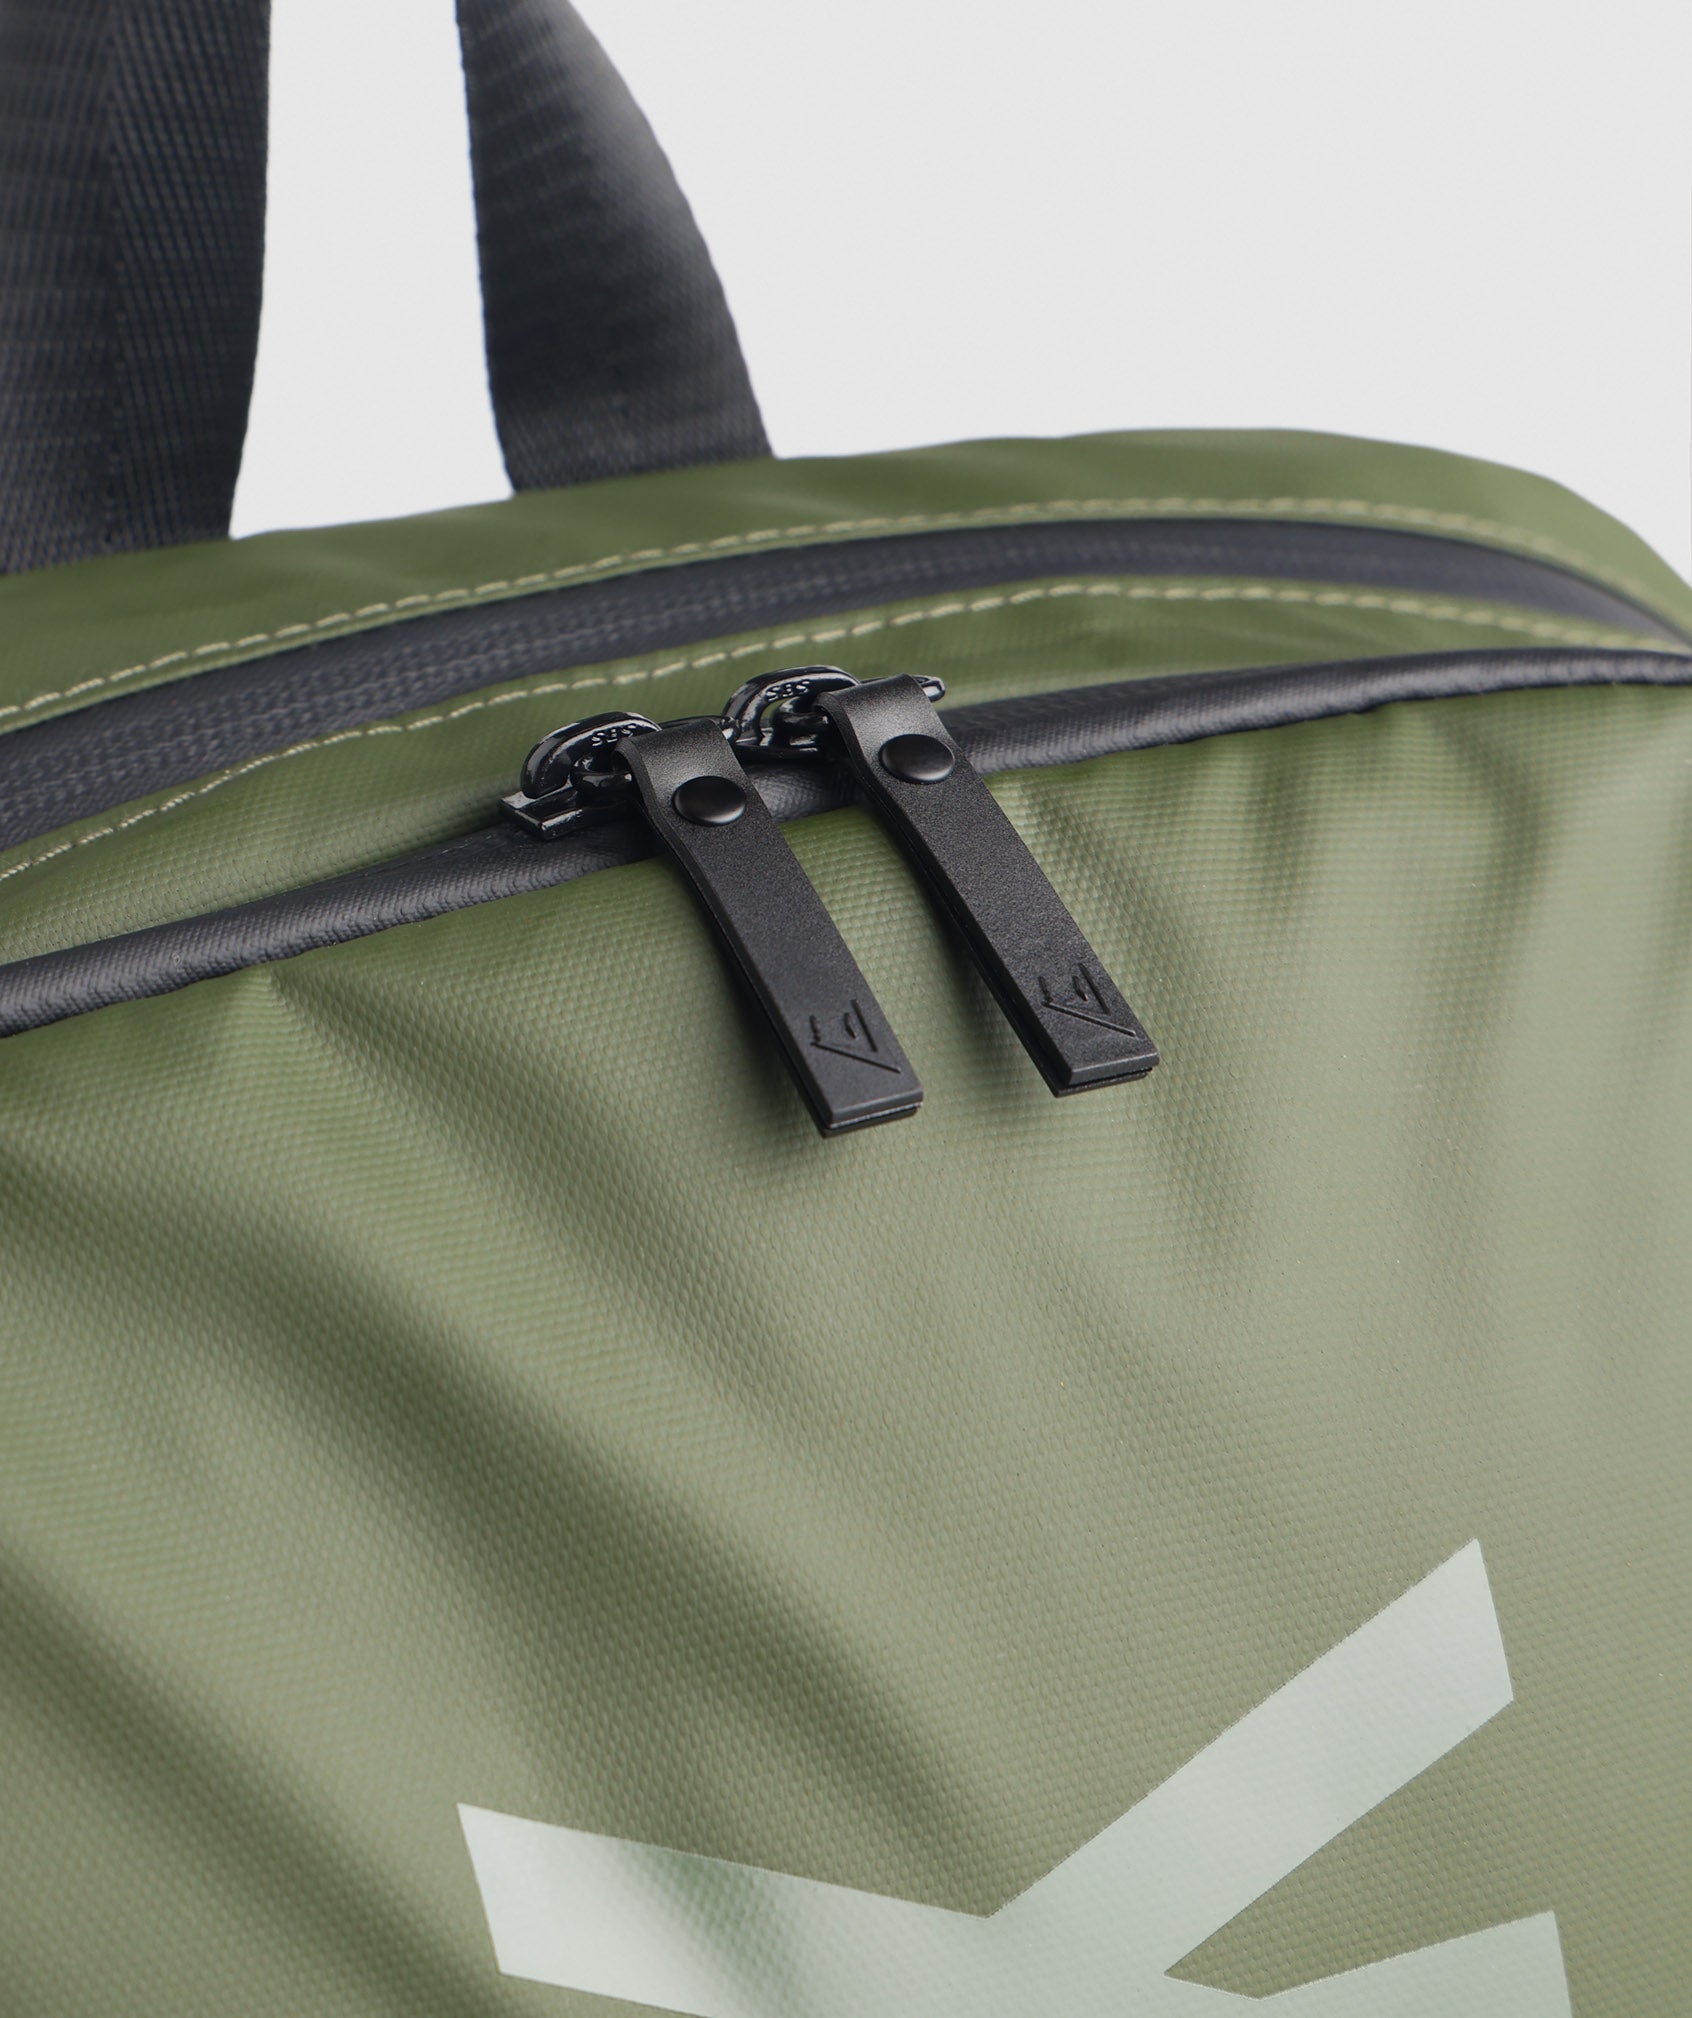 X-Series 0.3 Backpack in Core Olive